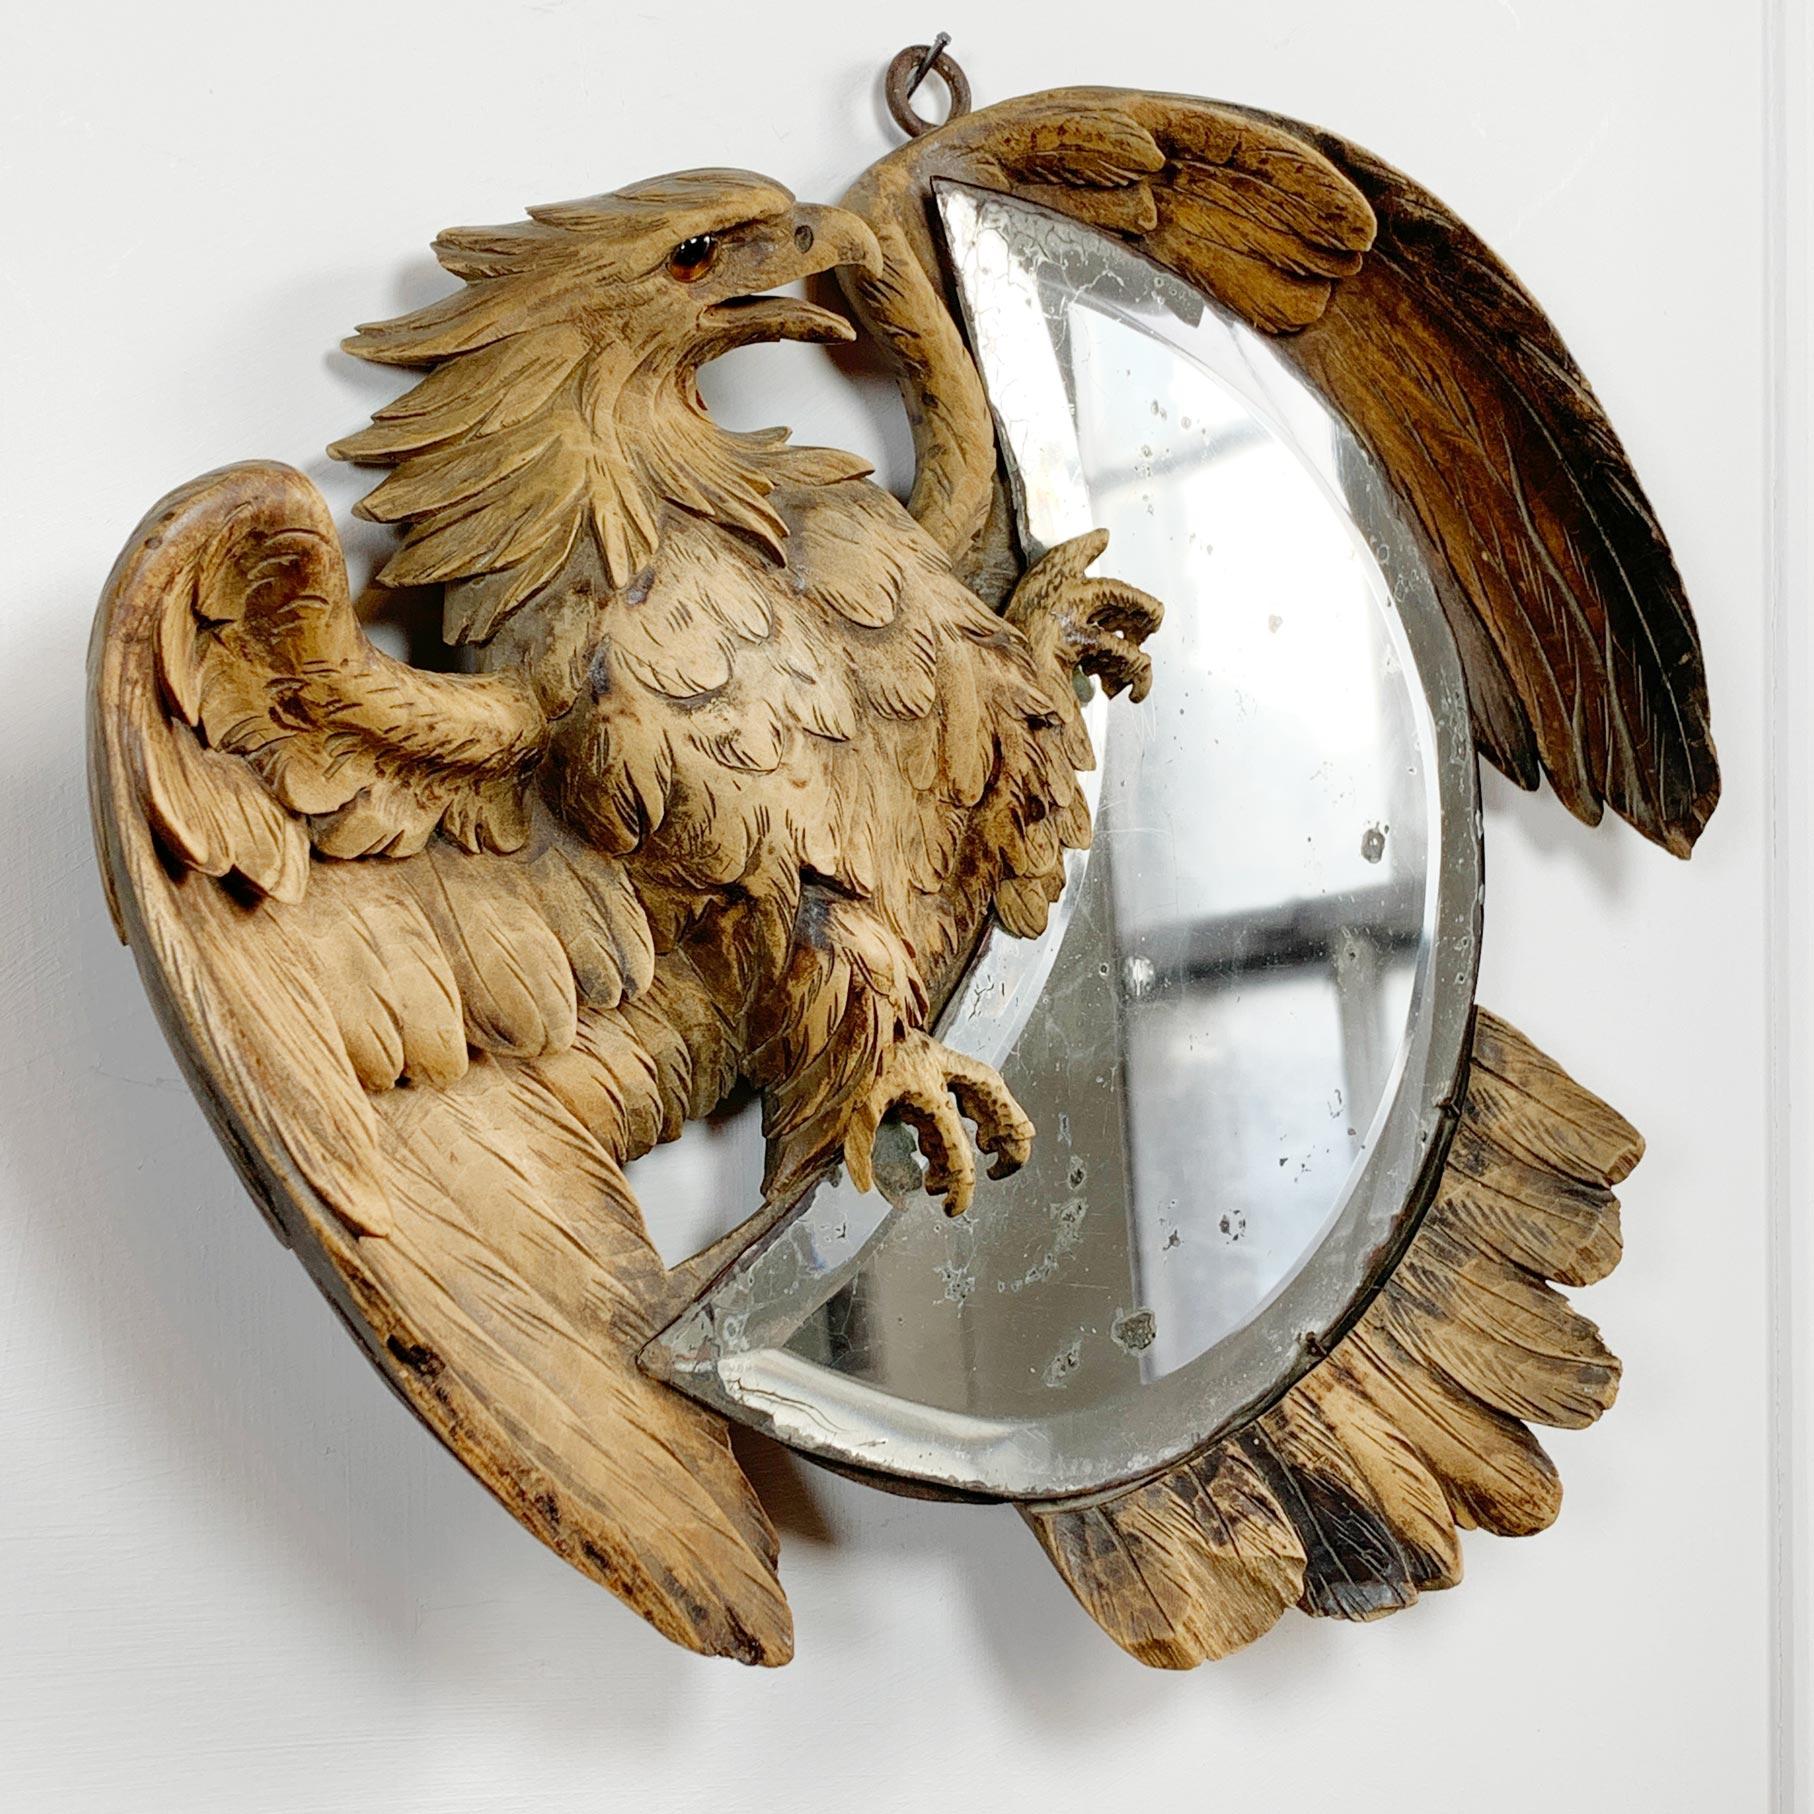 Fantastic hand carved Eagle gripping a crescent bevelled mirror, dating to the late 19th century, Swiss Black Forest. The carving still has its’ original glass eye and is in exceptional condition

There are a couple of minor losses to the claws,